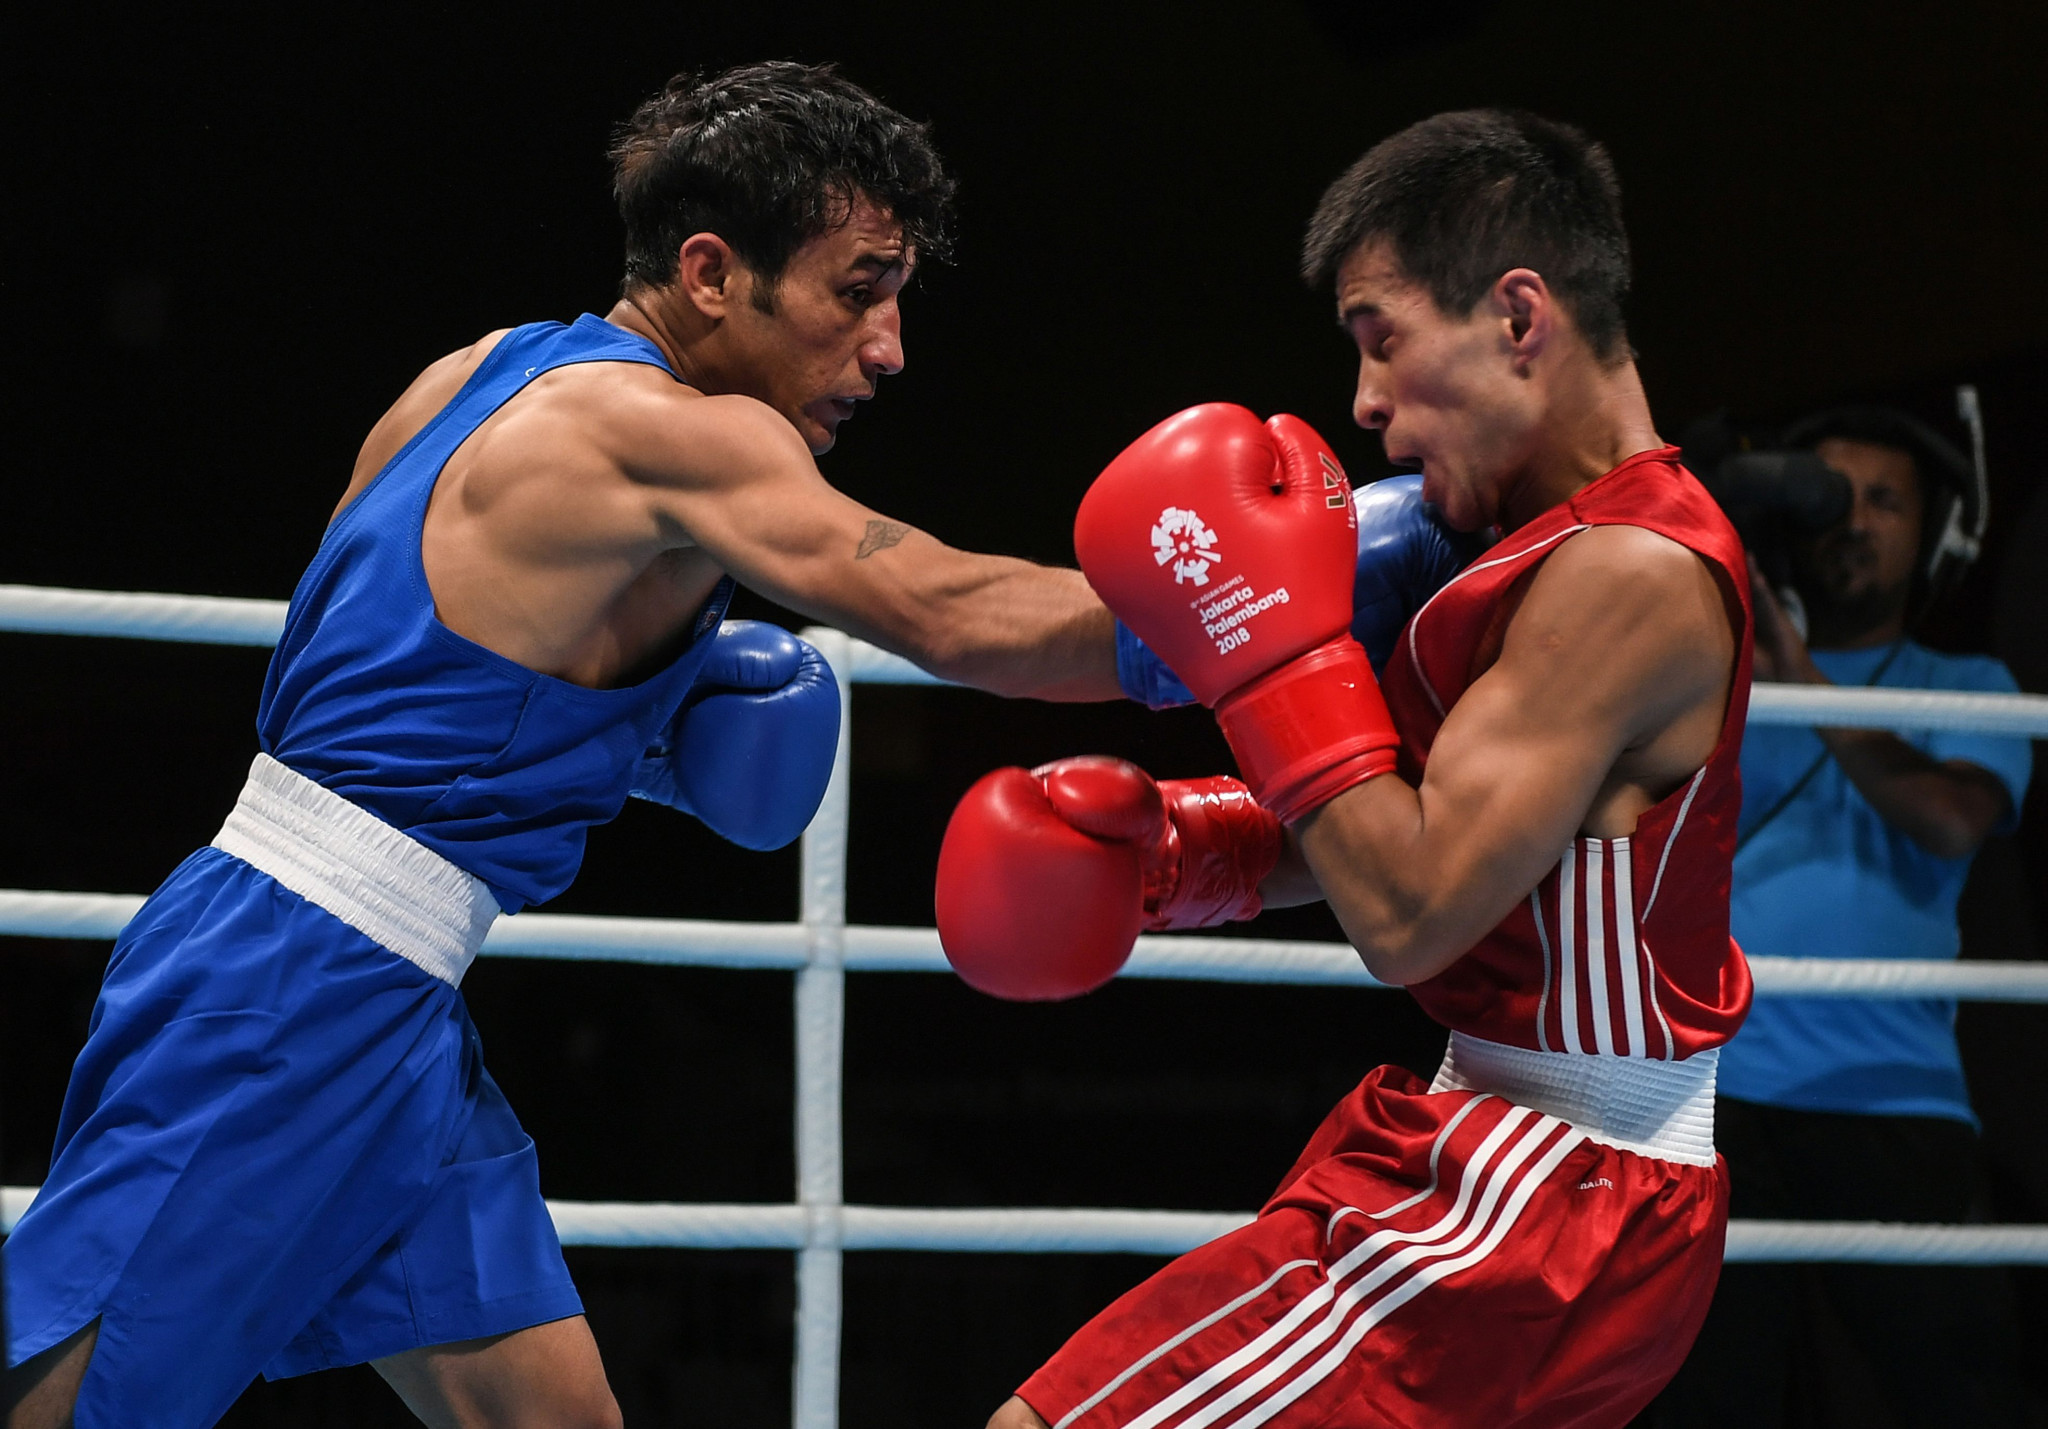 Mirlan Turkbay Uulu previously won a bronze medal at the Asian Boxing Championships ©Getty Images